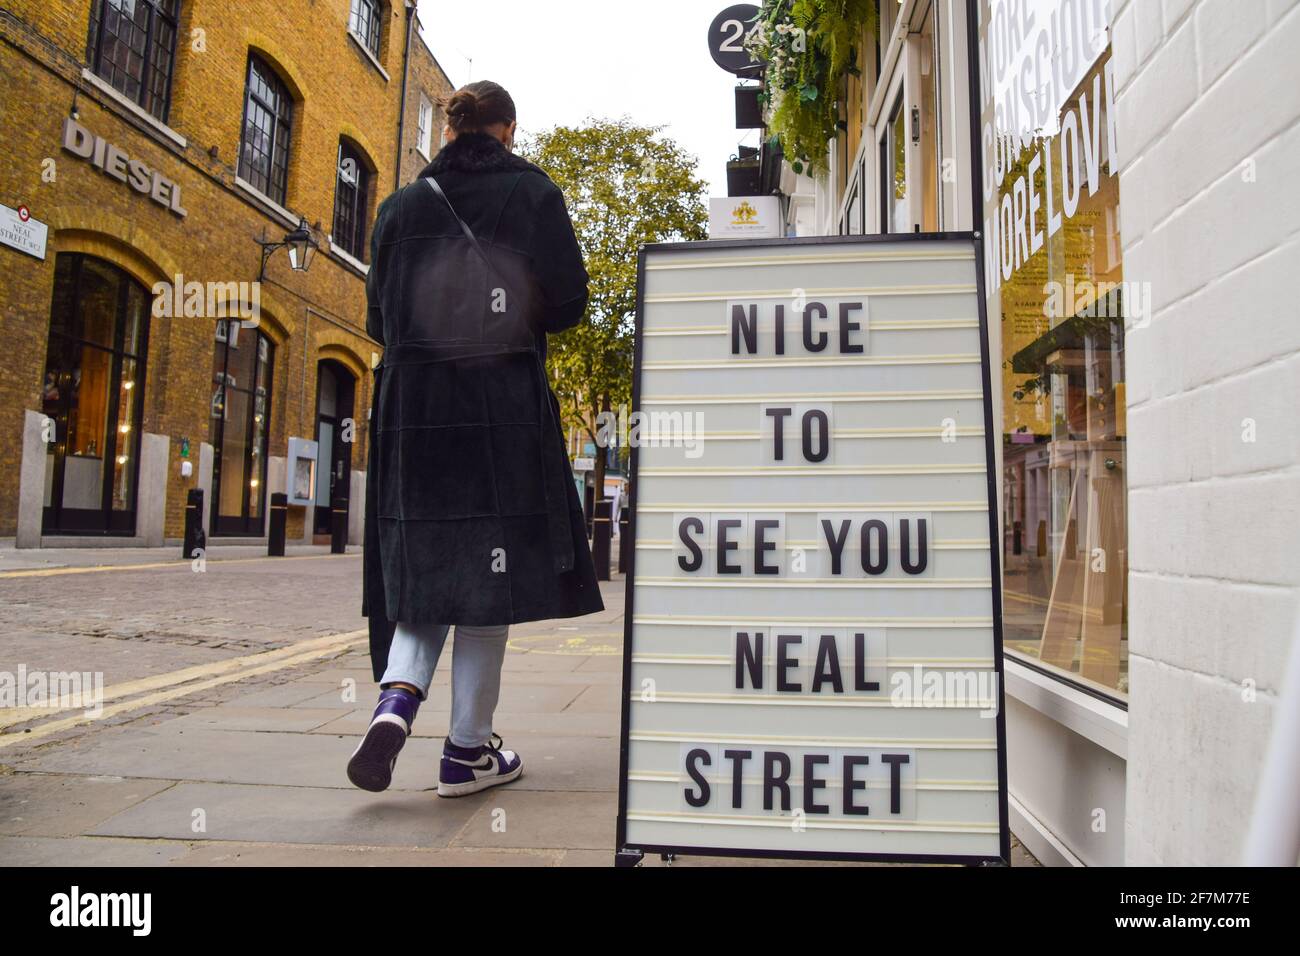 London, United Kingdom. 8th April 2021. A woman walks past a sign that reads 'Nice To See You Neal Street' in Covent Garden as shops, restaurants and other businesses prepare to reopen on 12th April. Credit: Vuk Valcic/Alamy Live News Stock Photo